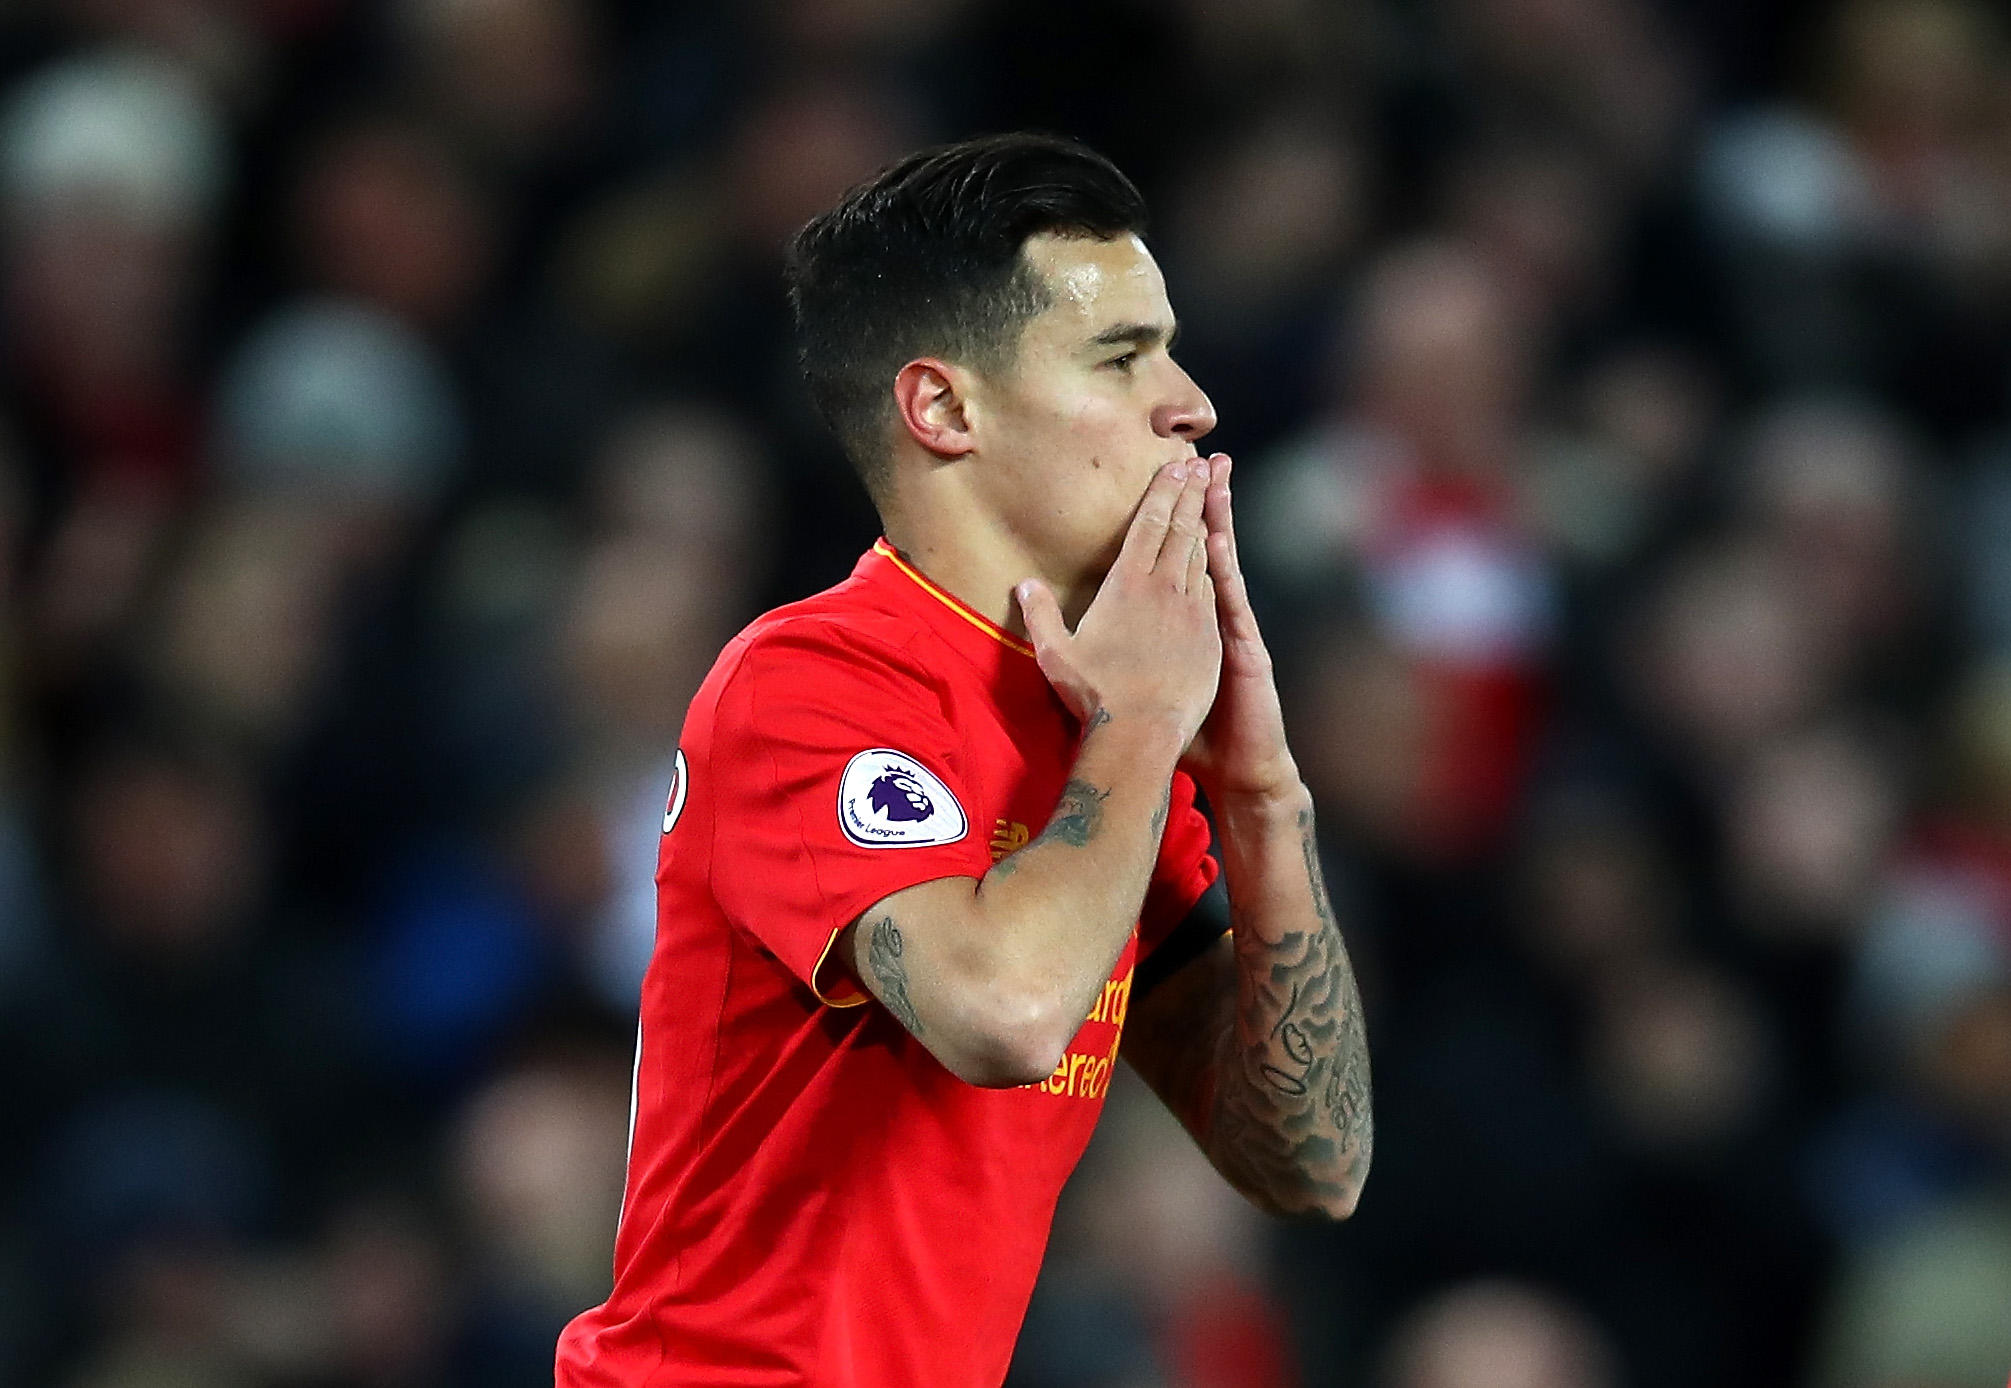 LIVERPOOL, ENGLAND - APRIL 05:  Philippe Coutinho of Liverpool celebrates scoring his sides first goal during the Premier League match between Liverpool and AFC Bournemouth at Anfield on April 5, 2017 in Liverpool, England.  (Photo by Clive Brunskill/Getty Images)